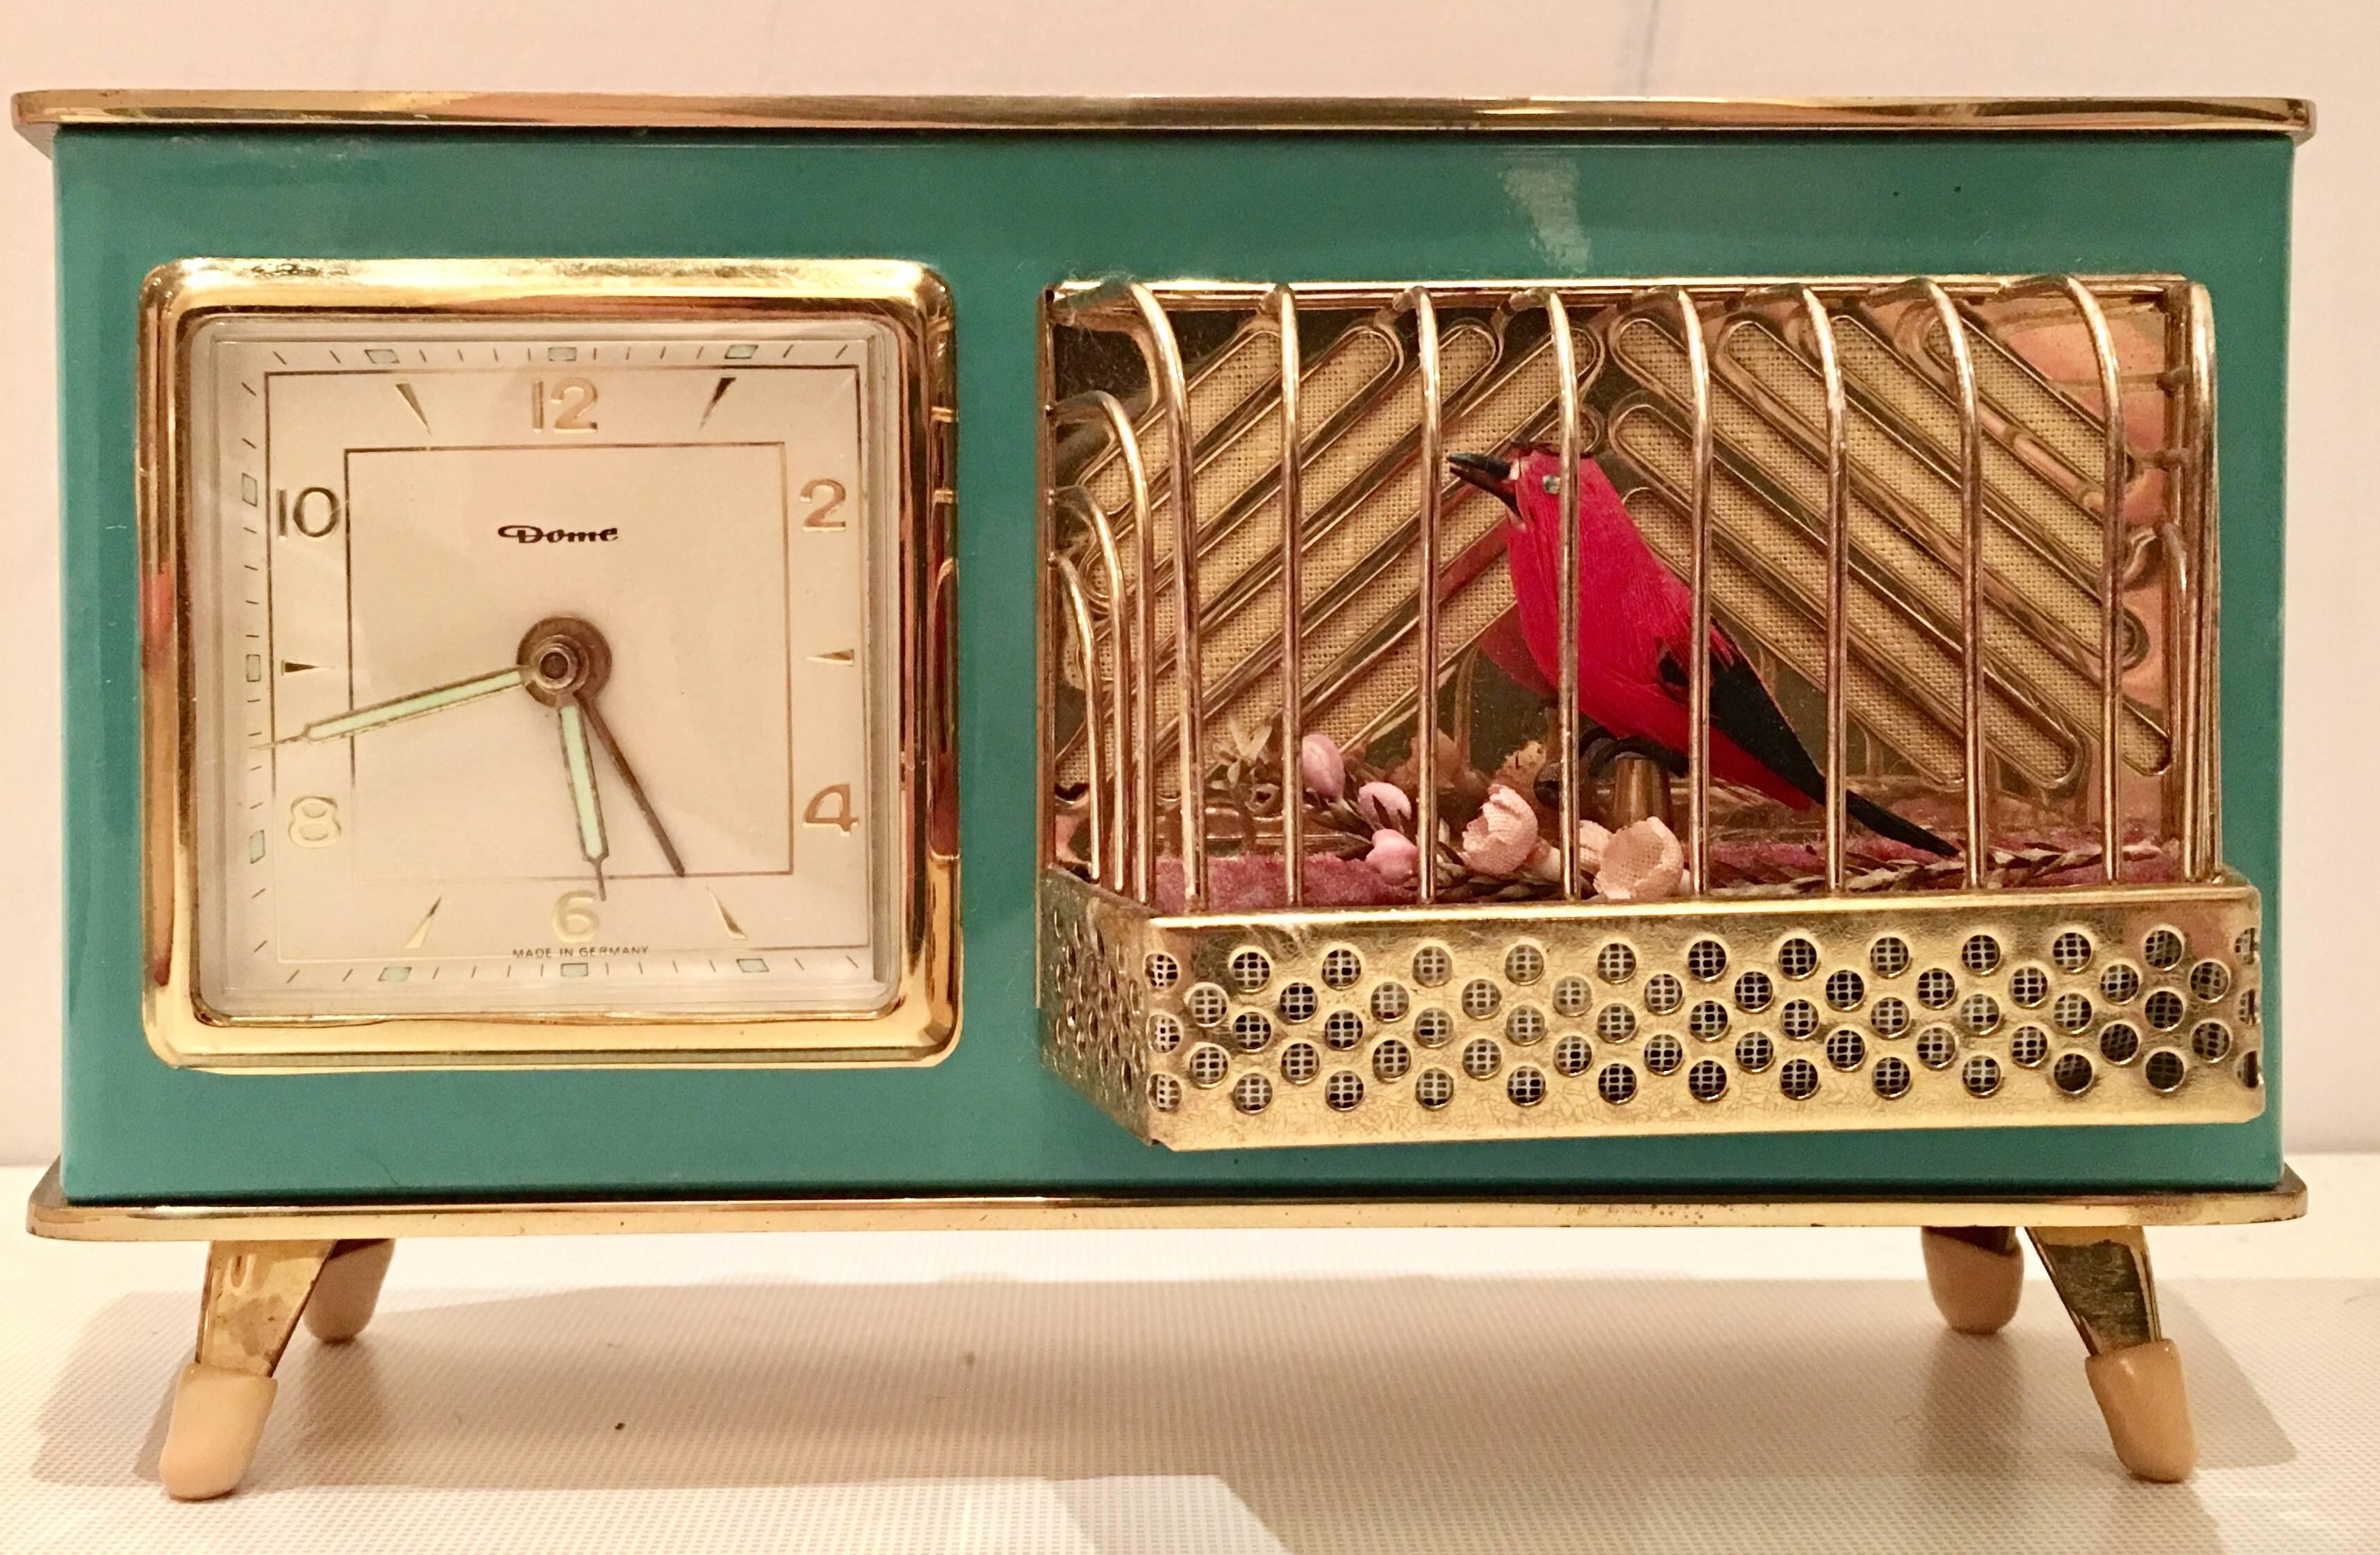 Rare 1950s brass and aqua enamel mechanical music box combination alarm clock by Dome, Germany. This fantastic singing bird in a cage tweets and osculates upon the alarm set time. The clock hands glow in the dark. The gold brass is brushed on the